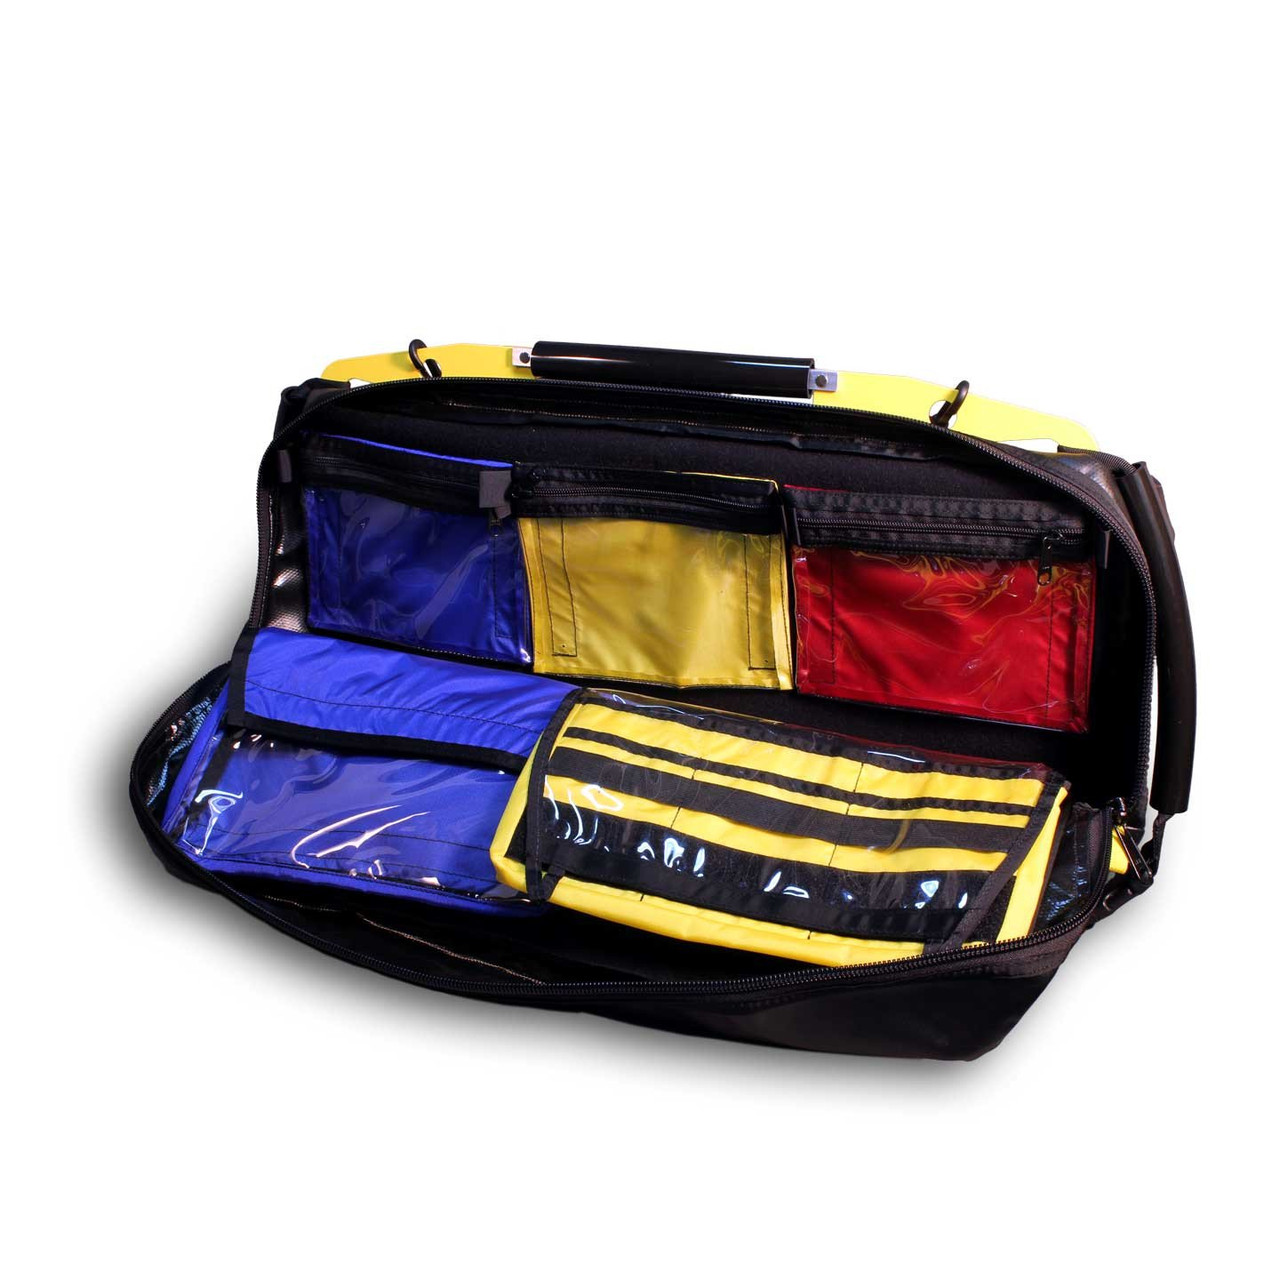 Conterra Infinity Jump II Medical Bag | Live Action Safety